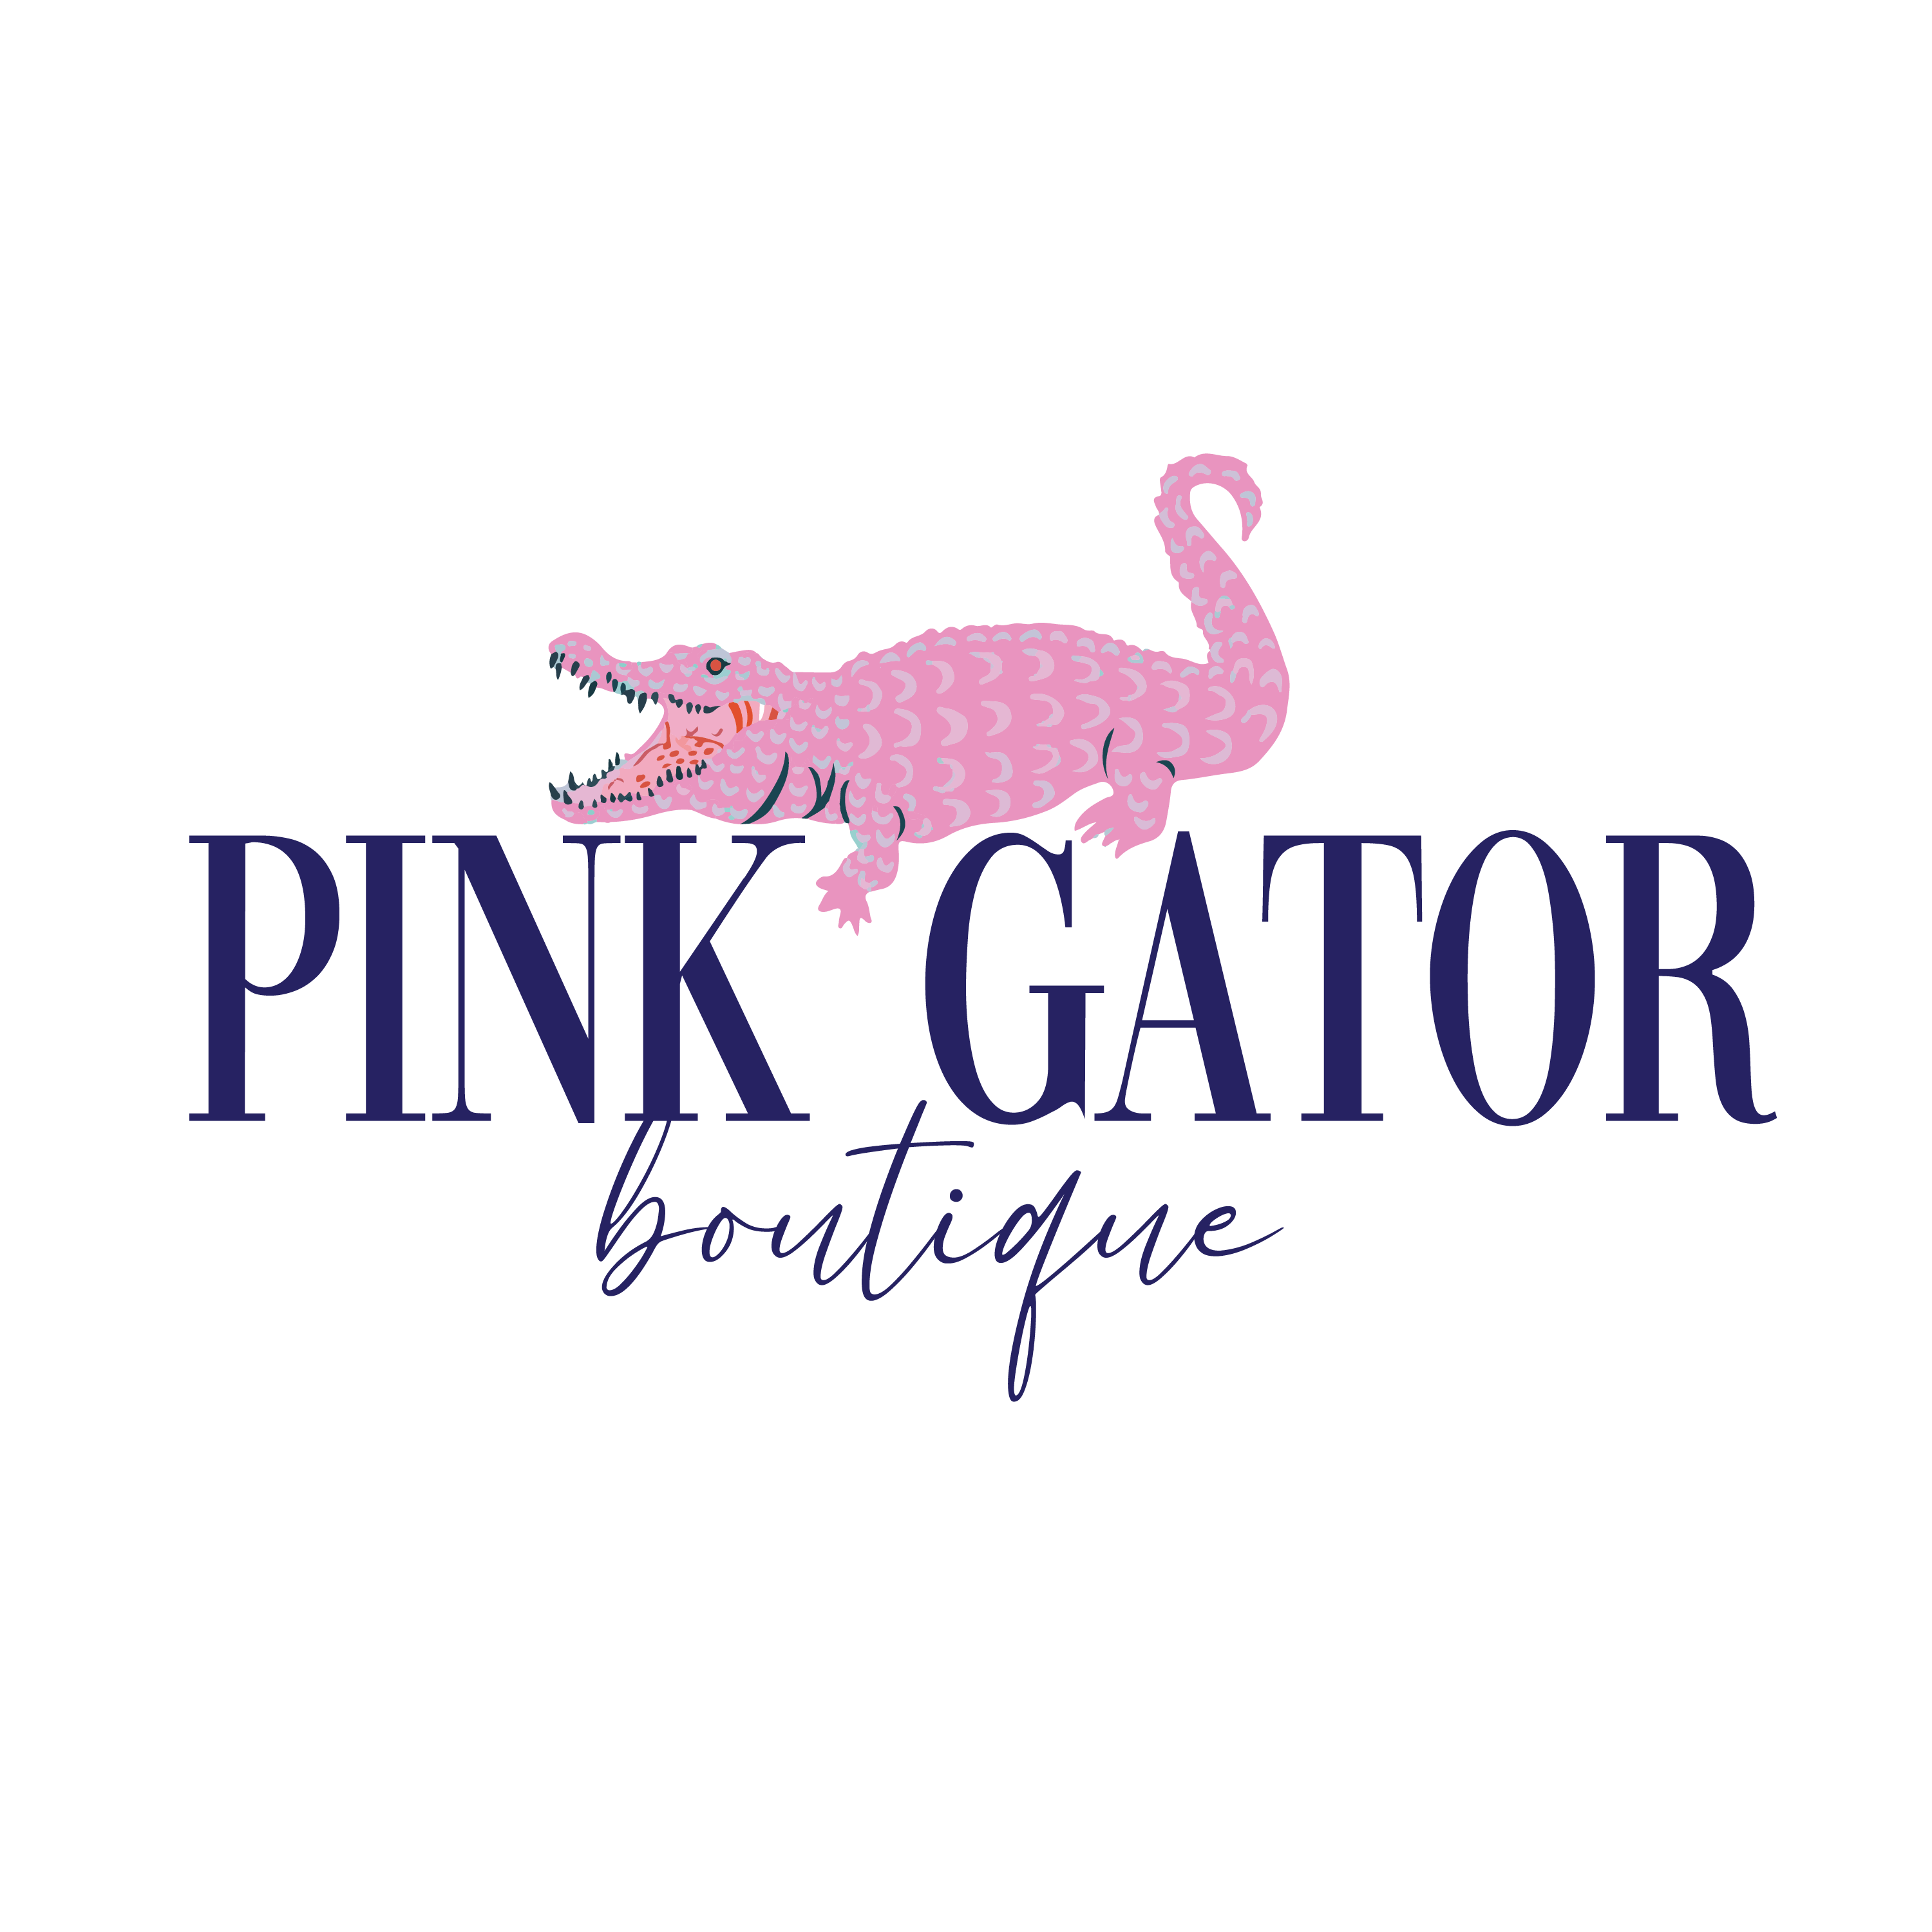 The Pink Gator Boutique